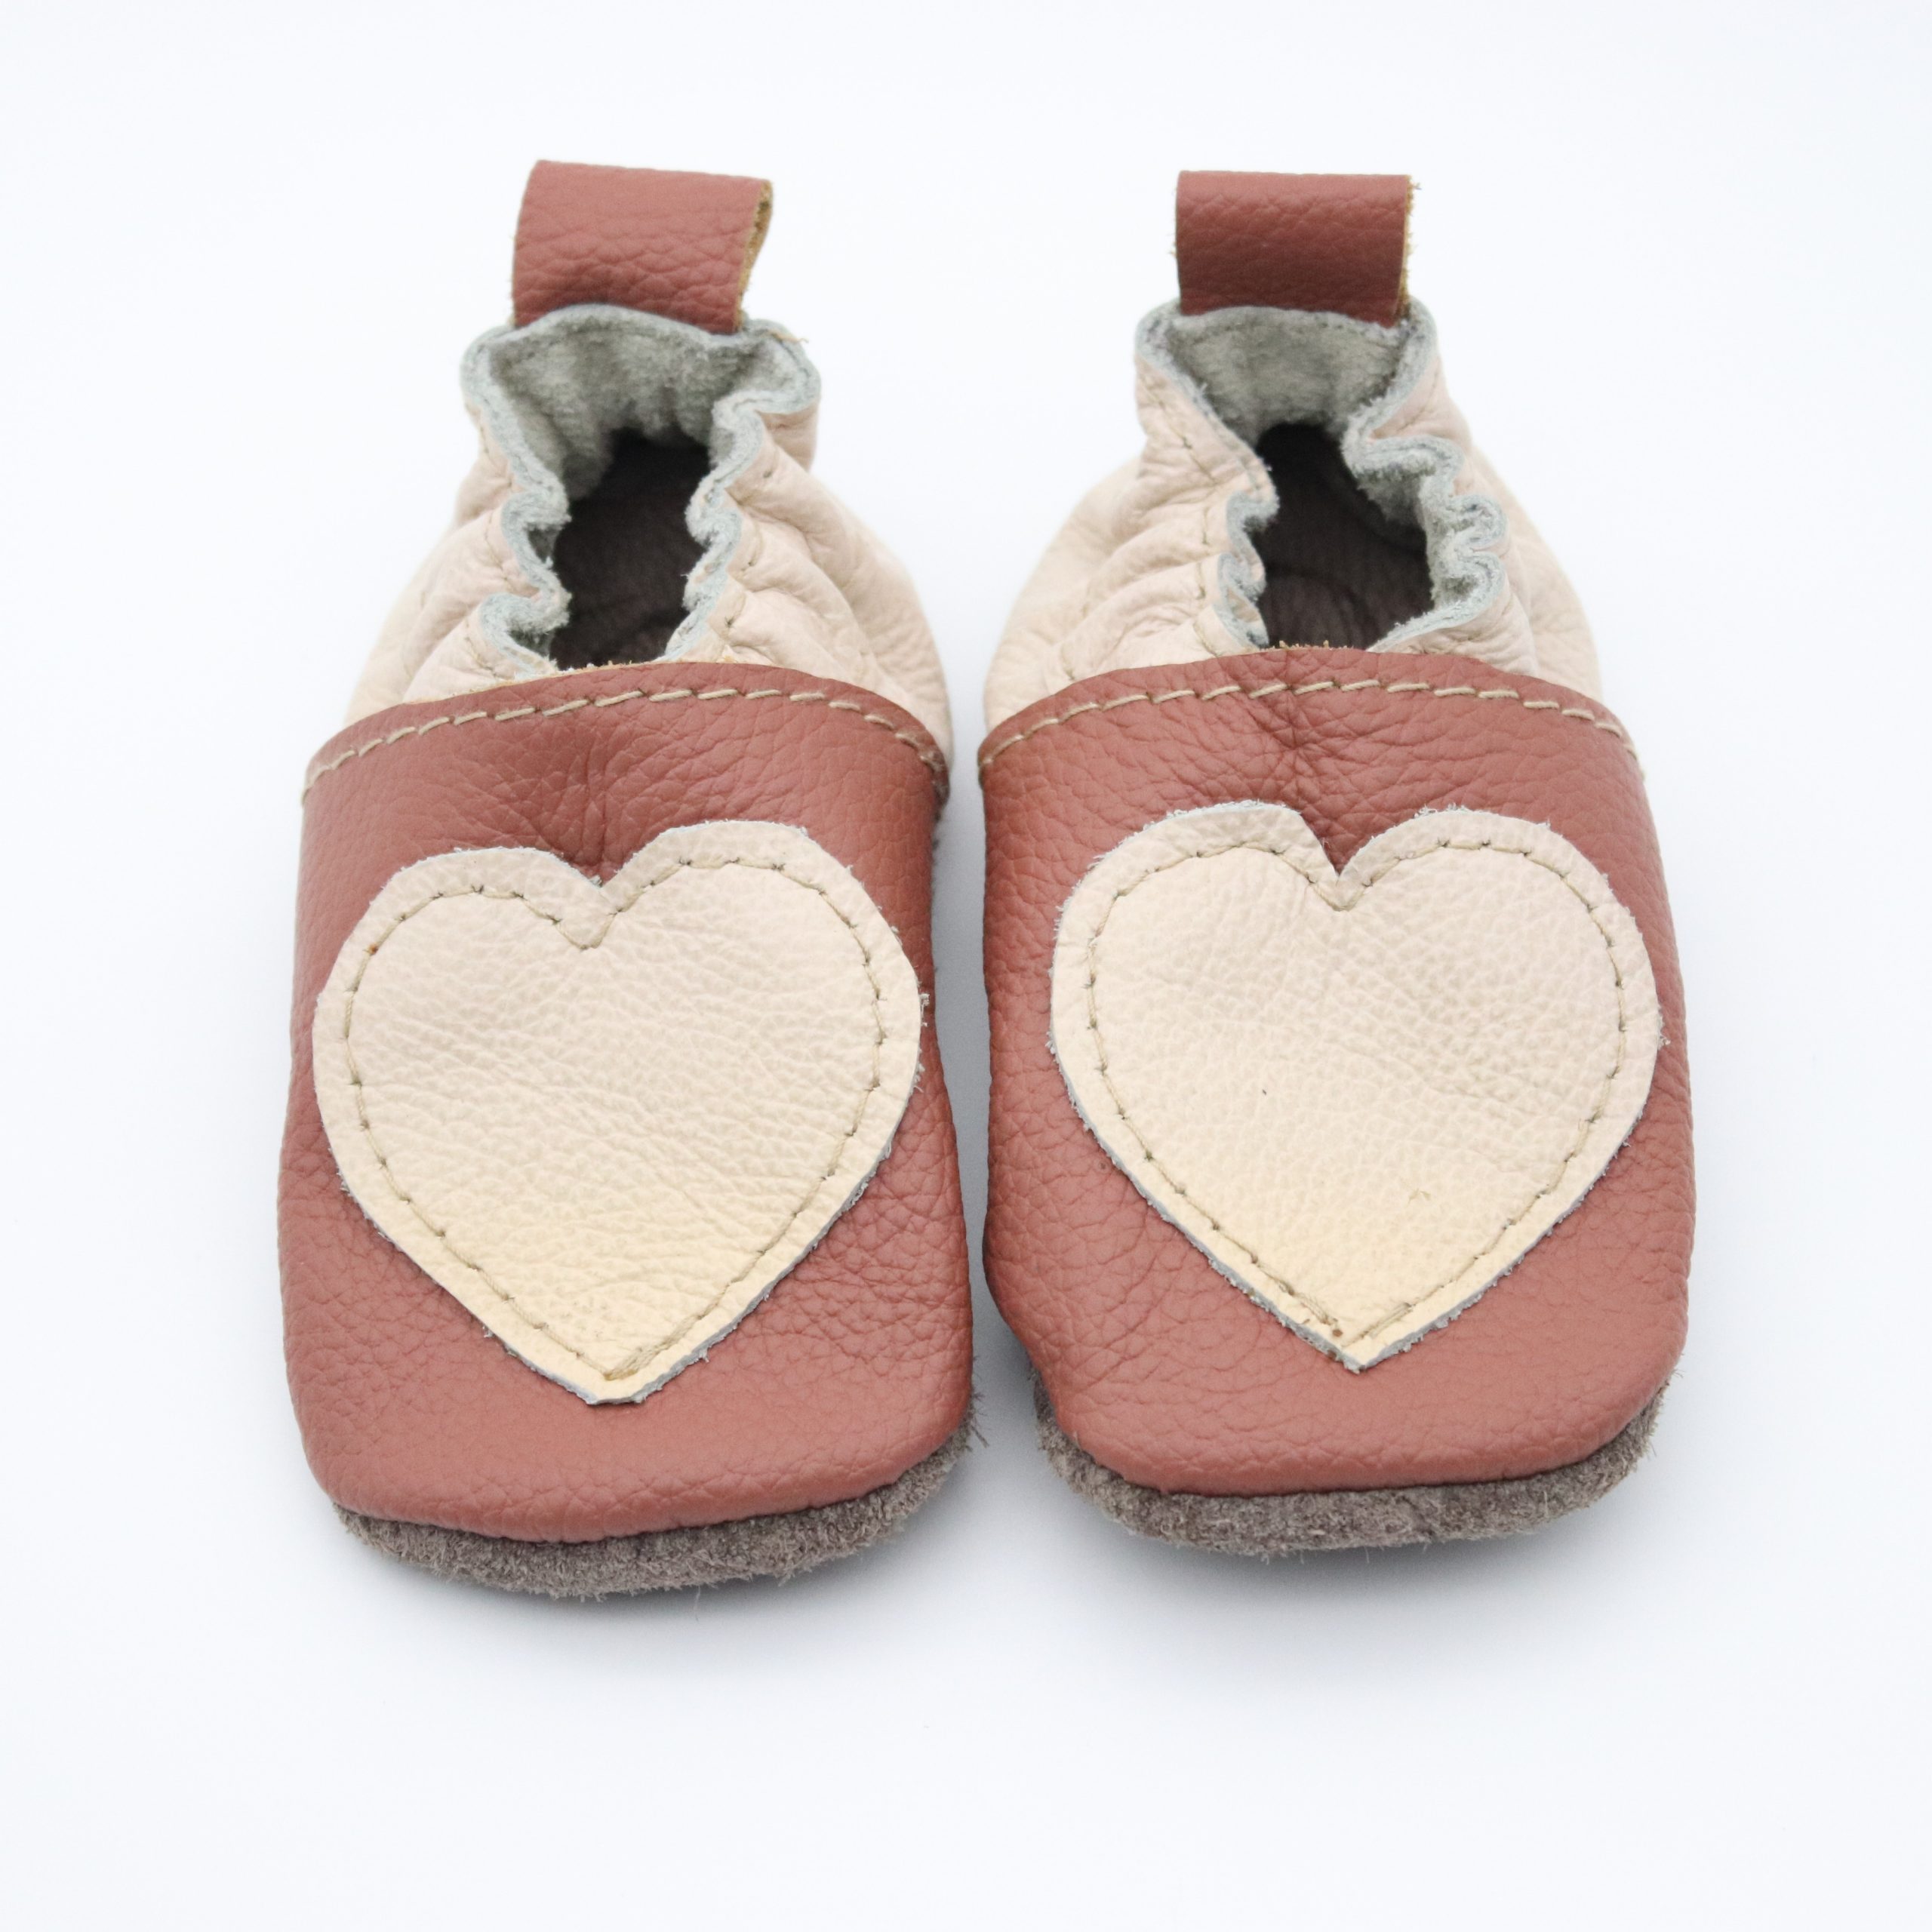 Baby soft sole leather shoes (heart 